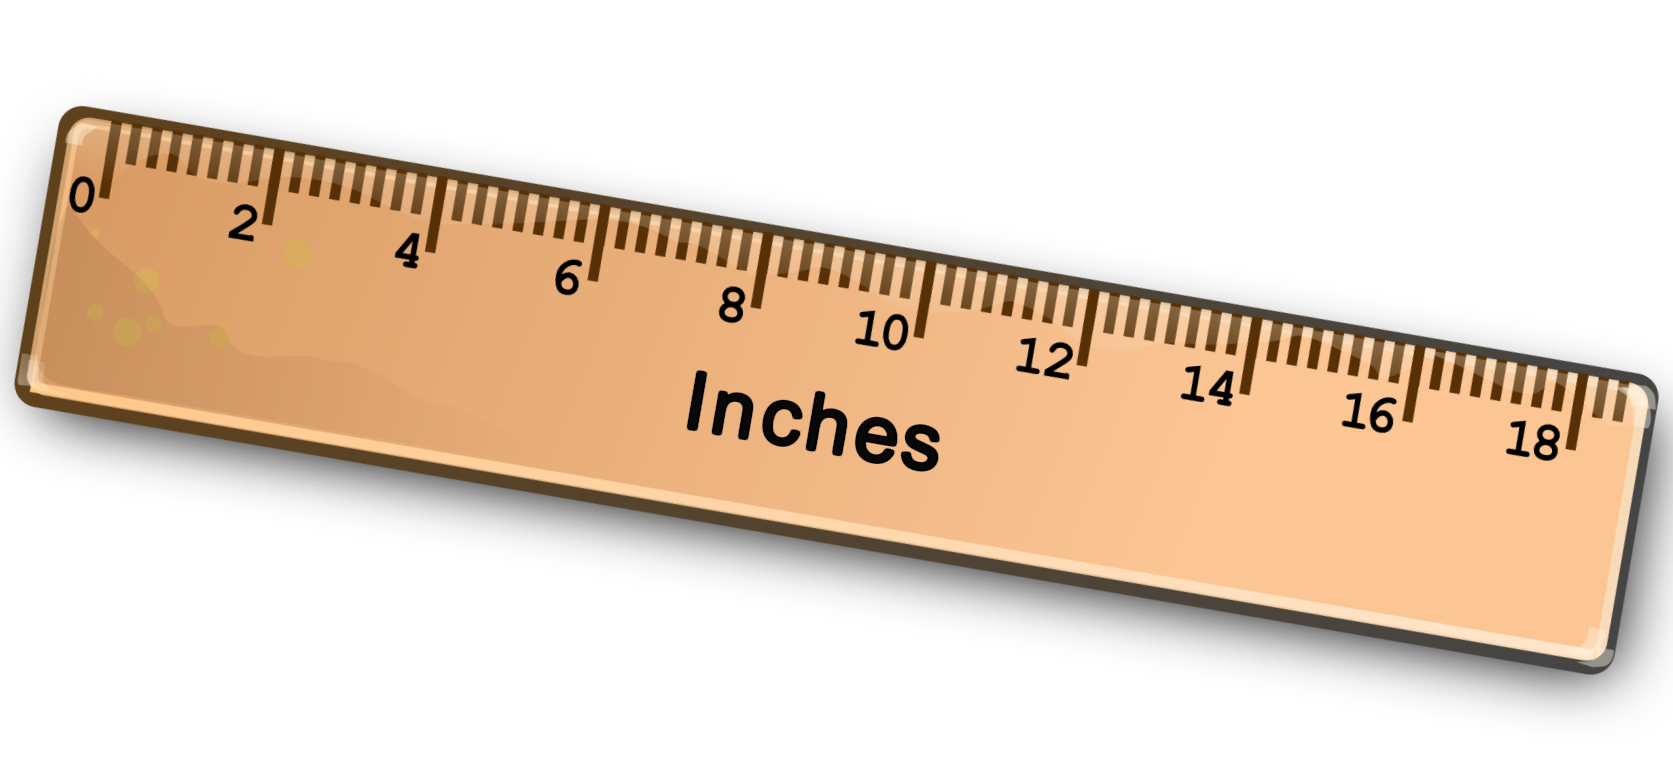 ruler picture